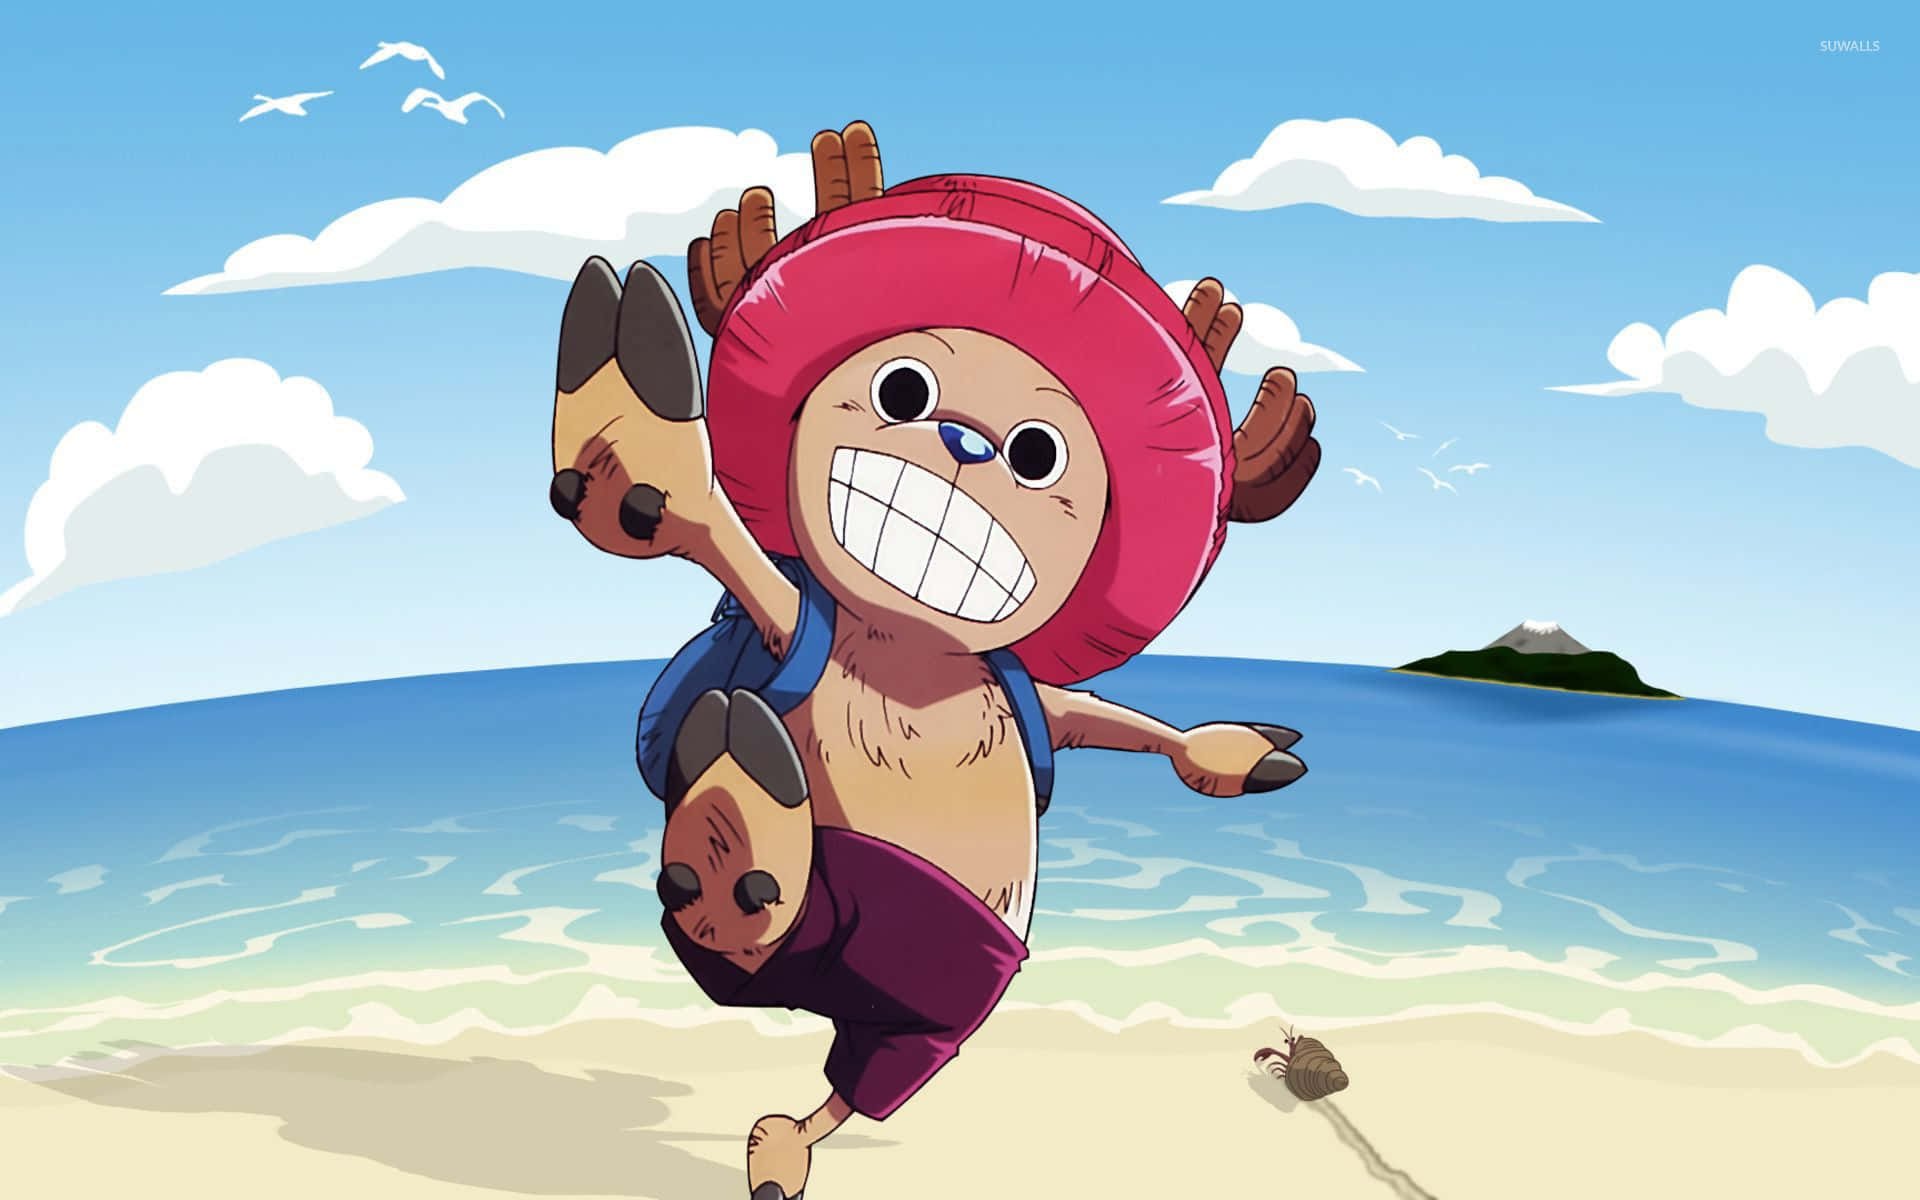 100+] One Piece Chopper Wallpapers